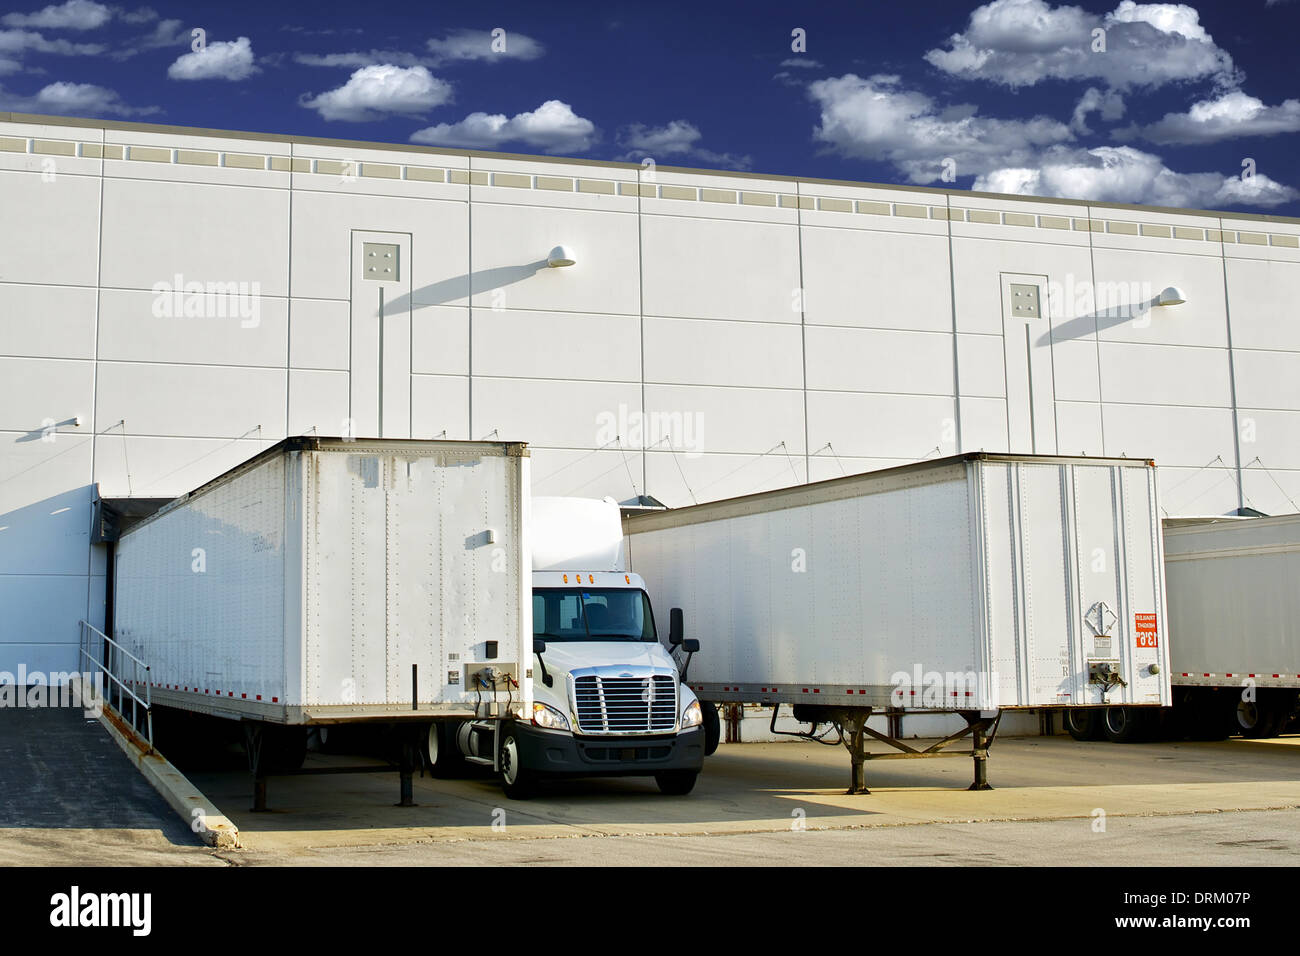 Warehouse Loading Docks - Business District. Semi Trucks and Trailers Loading. Shipping and Logistics Photography Collection. Stock Photo